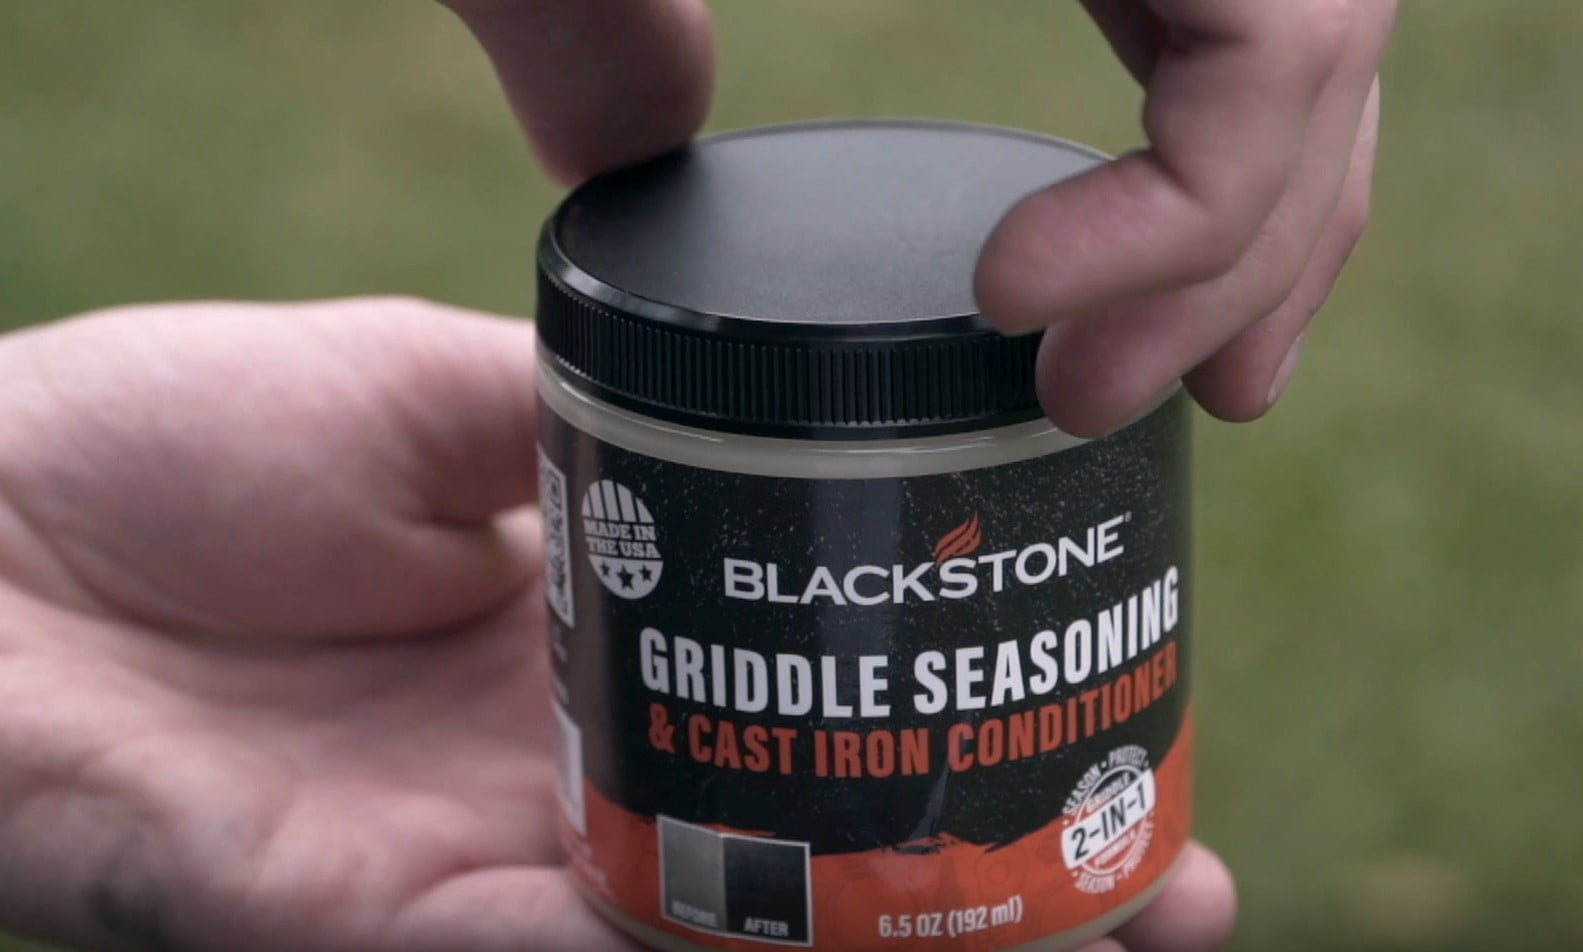 Blackstone Griddle Seasoning & Cast Iron Conditioner▫For Griddles